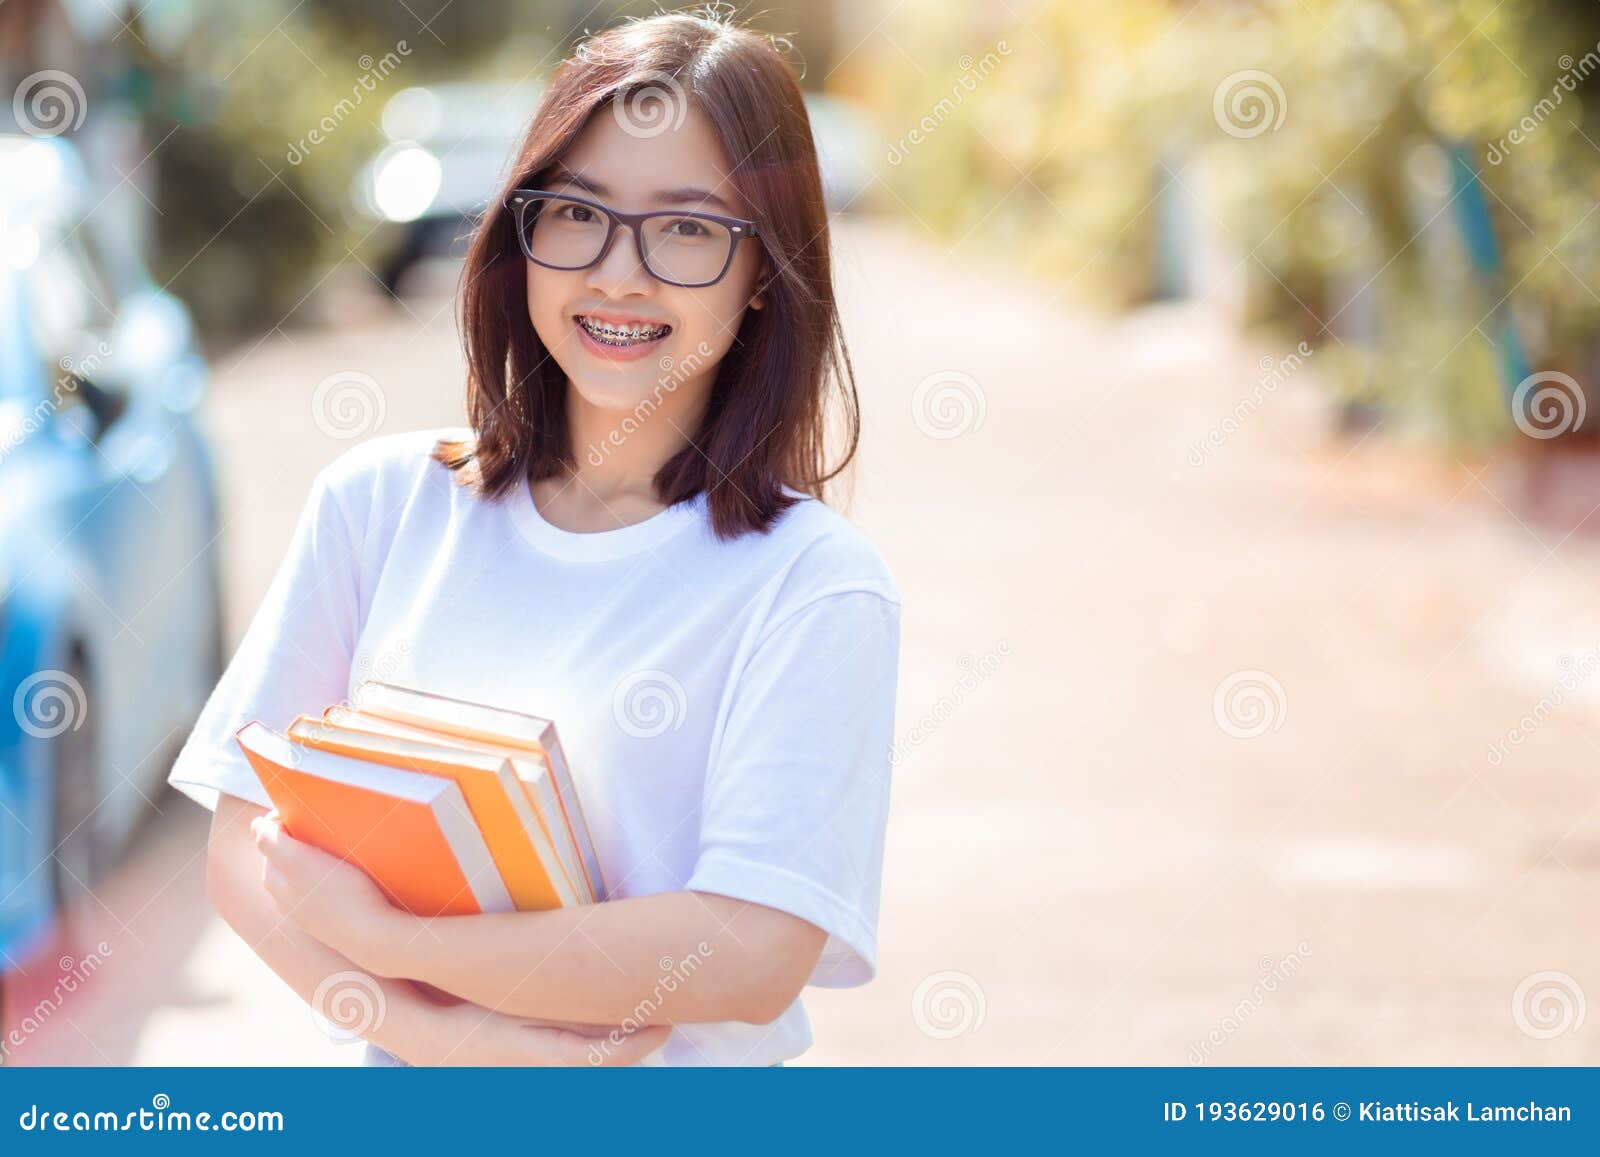 Portrait Of Young Student Asian Woman Wearing Braces Beauty Smile With